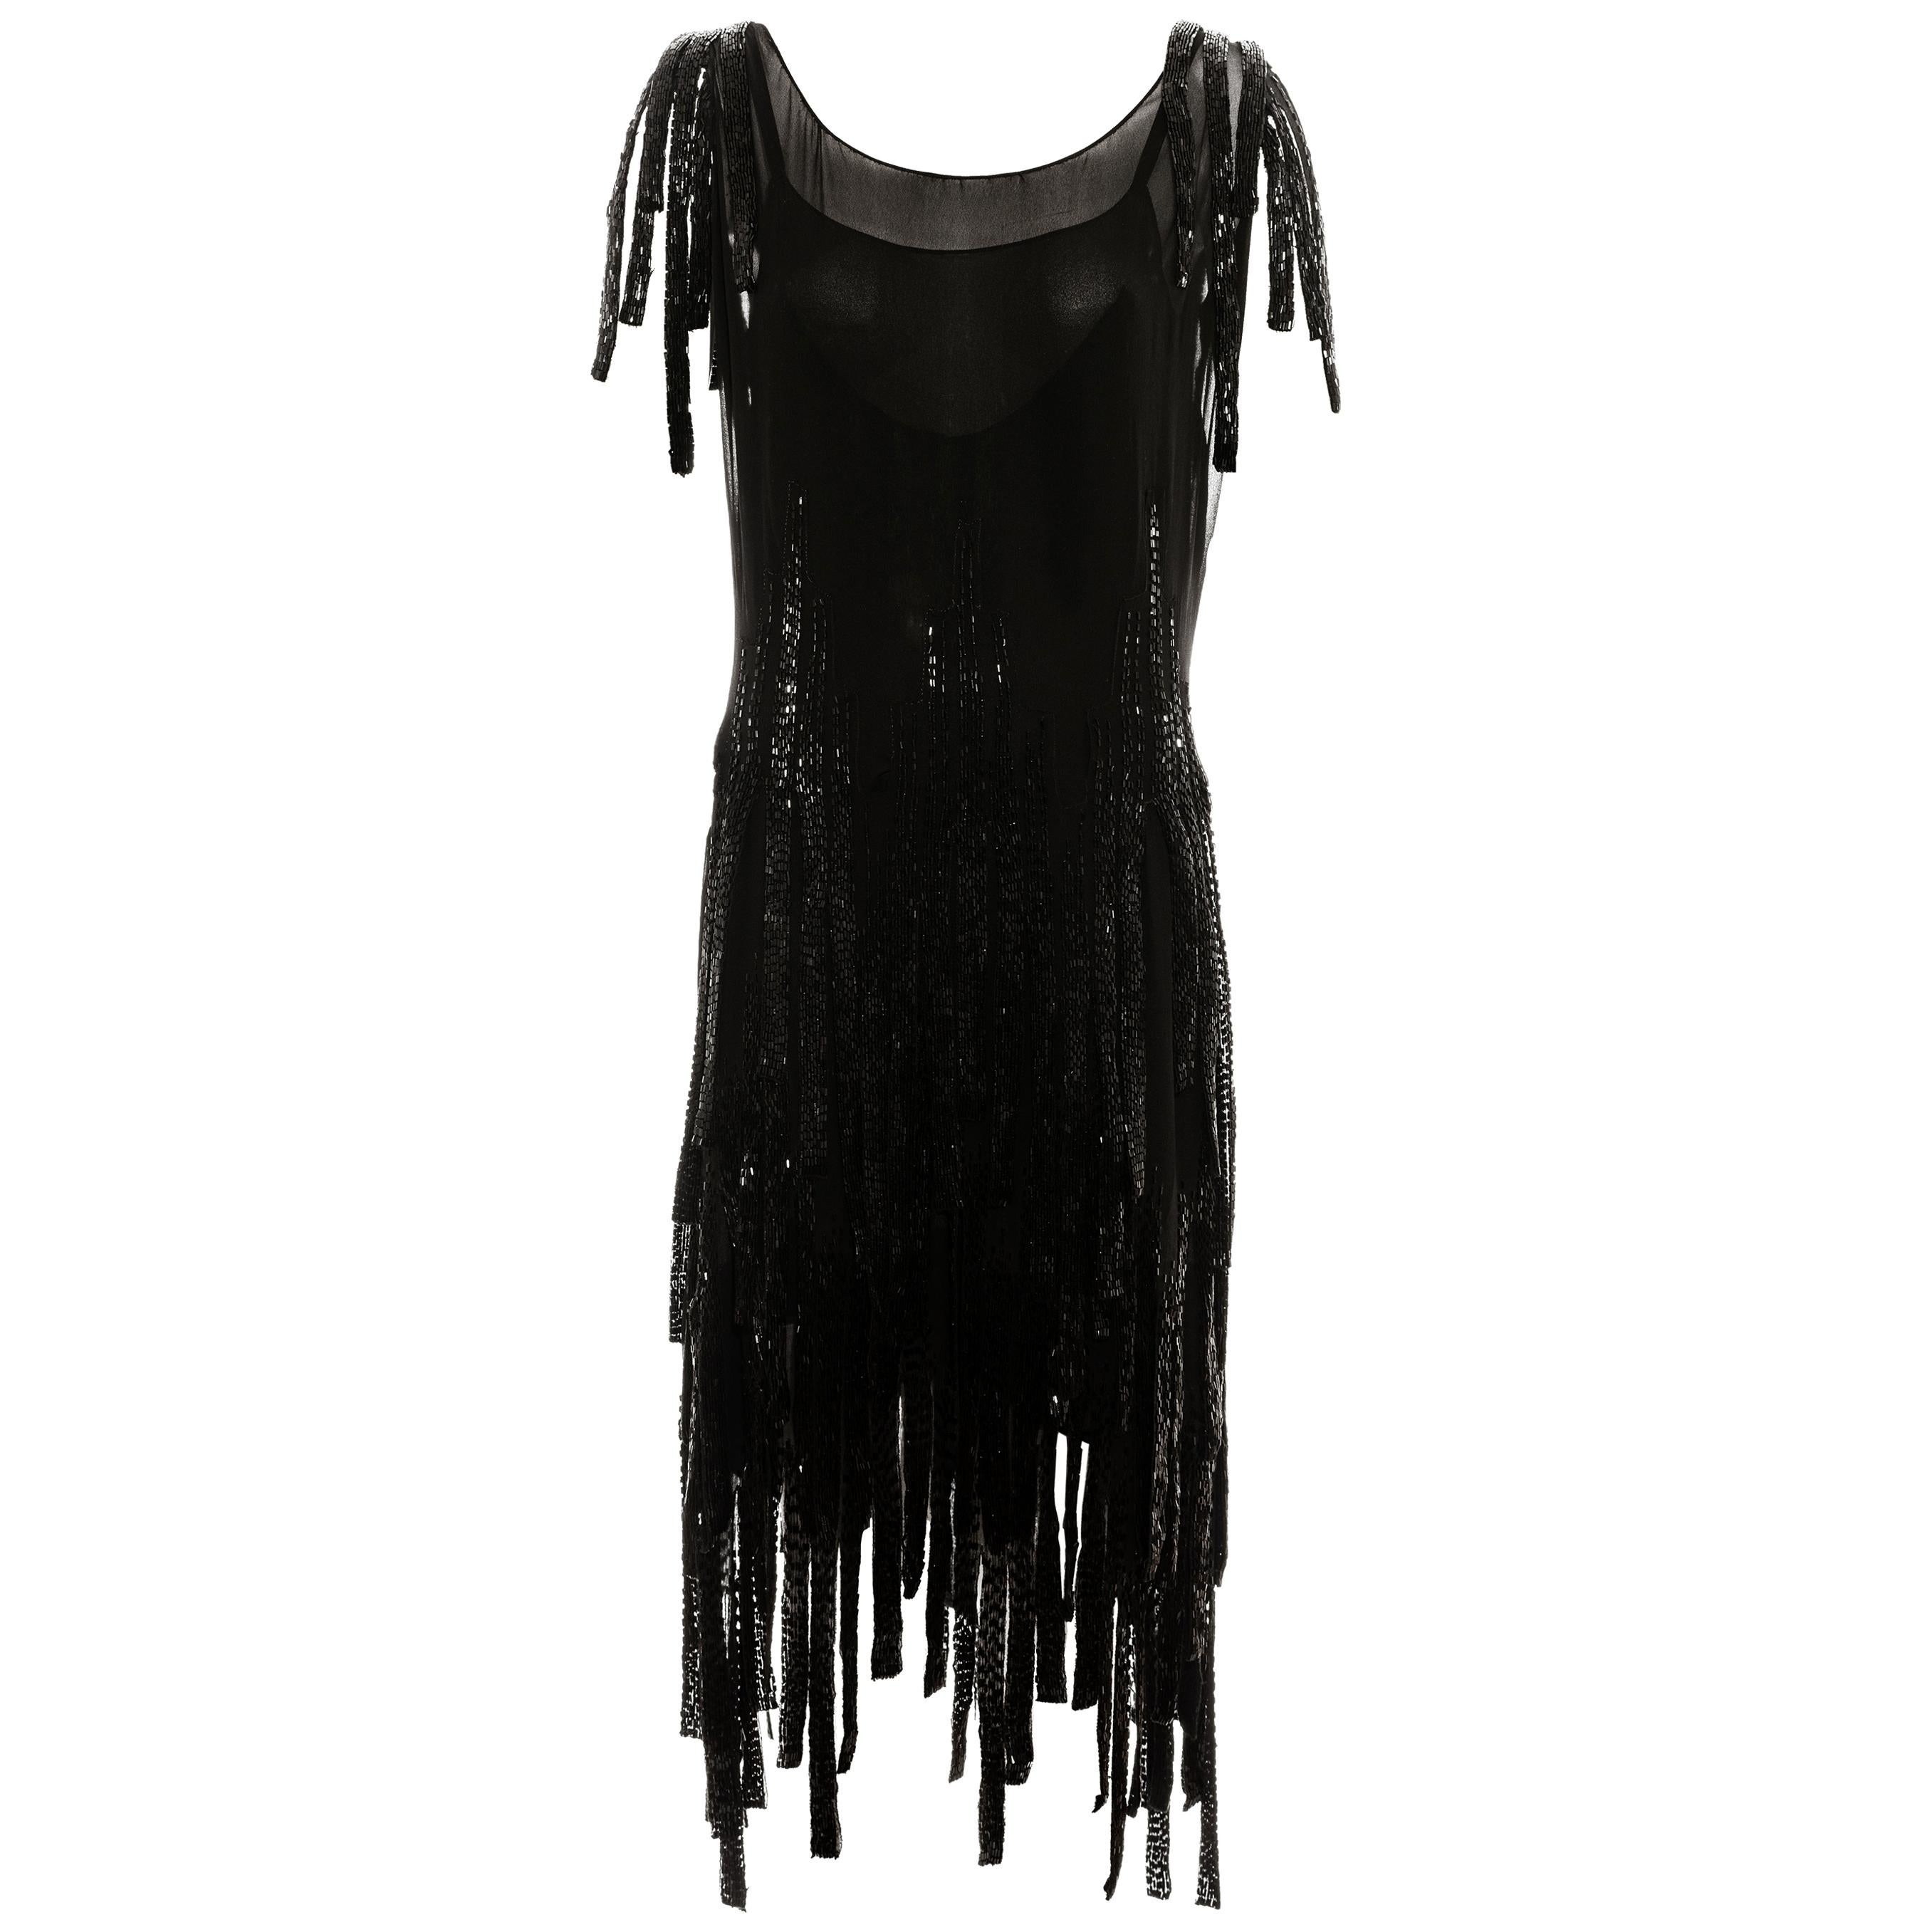 Gabrielle Chanel couture black silk beaded flapper dress, c. 1924 - 1926 at  1stDibs